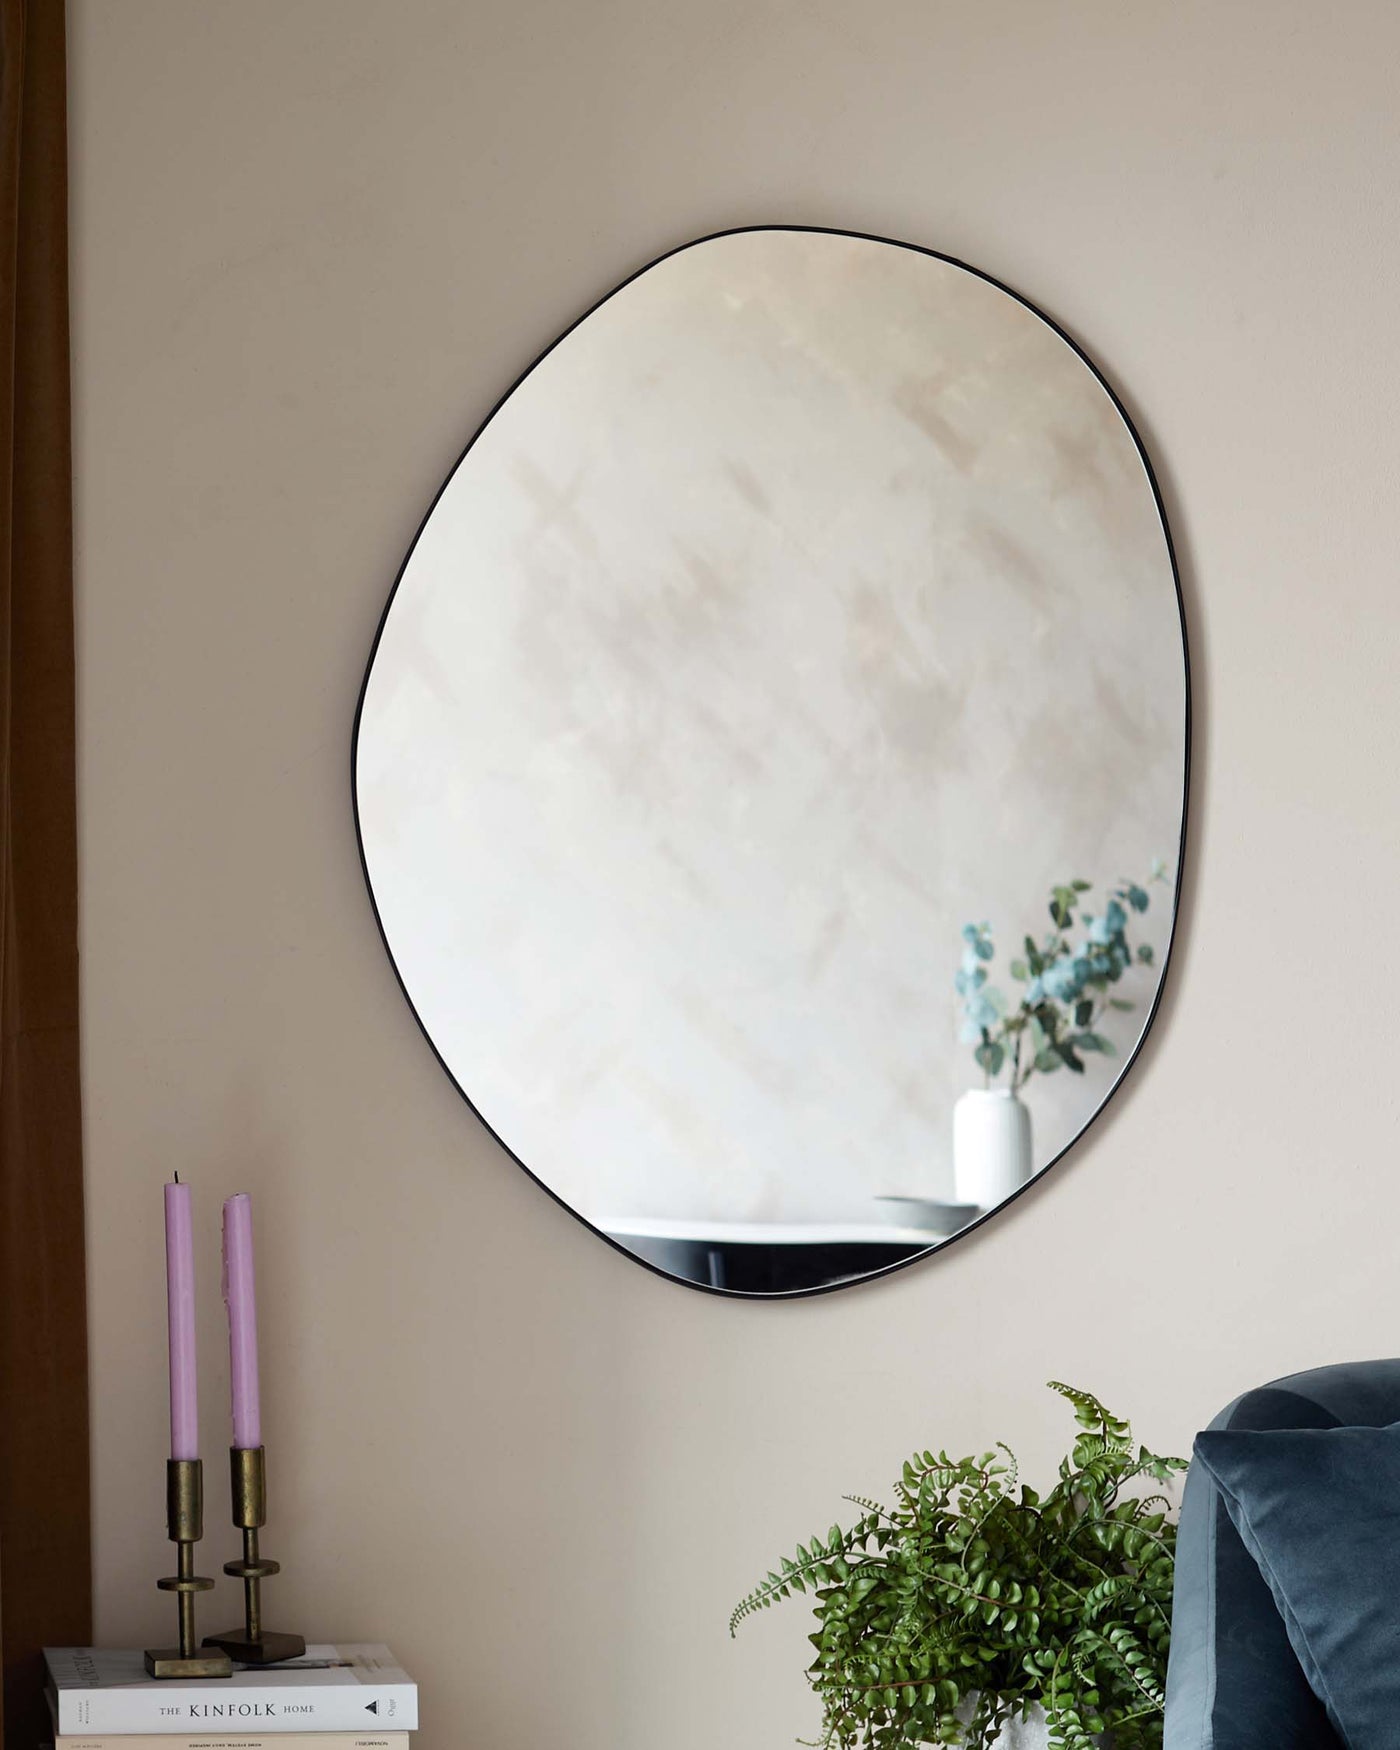 Elegant oval wall mirror with a slender black frame, alongside a small minimalist side table featuring a stack of books, a brass dual candlestick holder with lavender candles, and a simple white vase with eucalyptus branches.